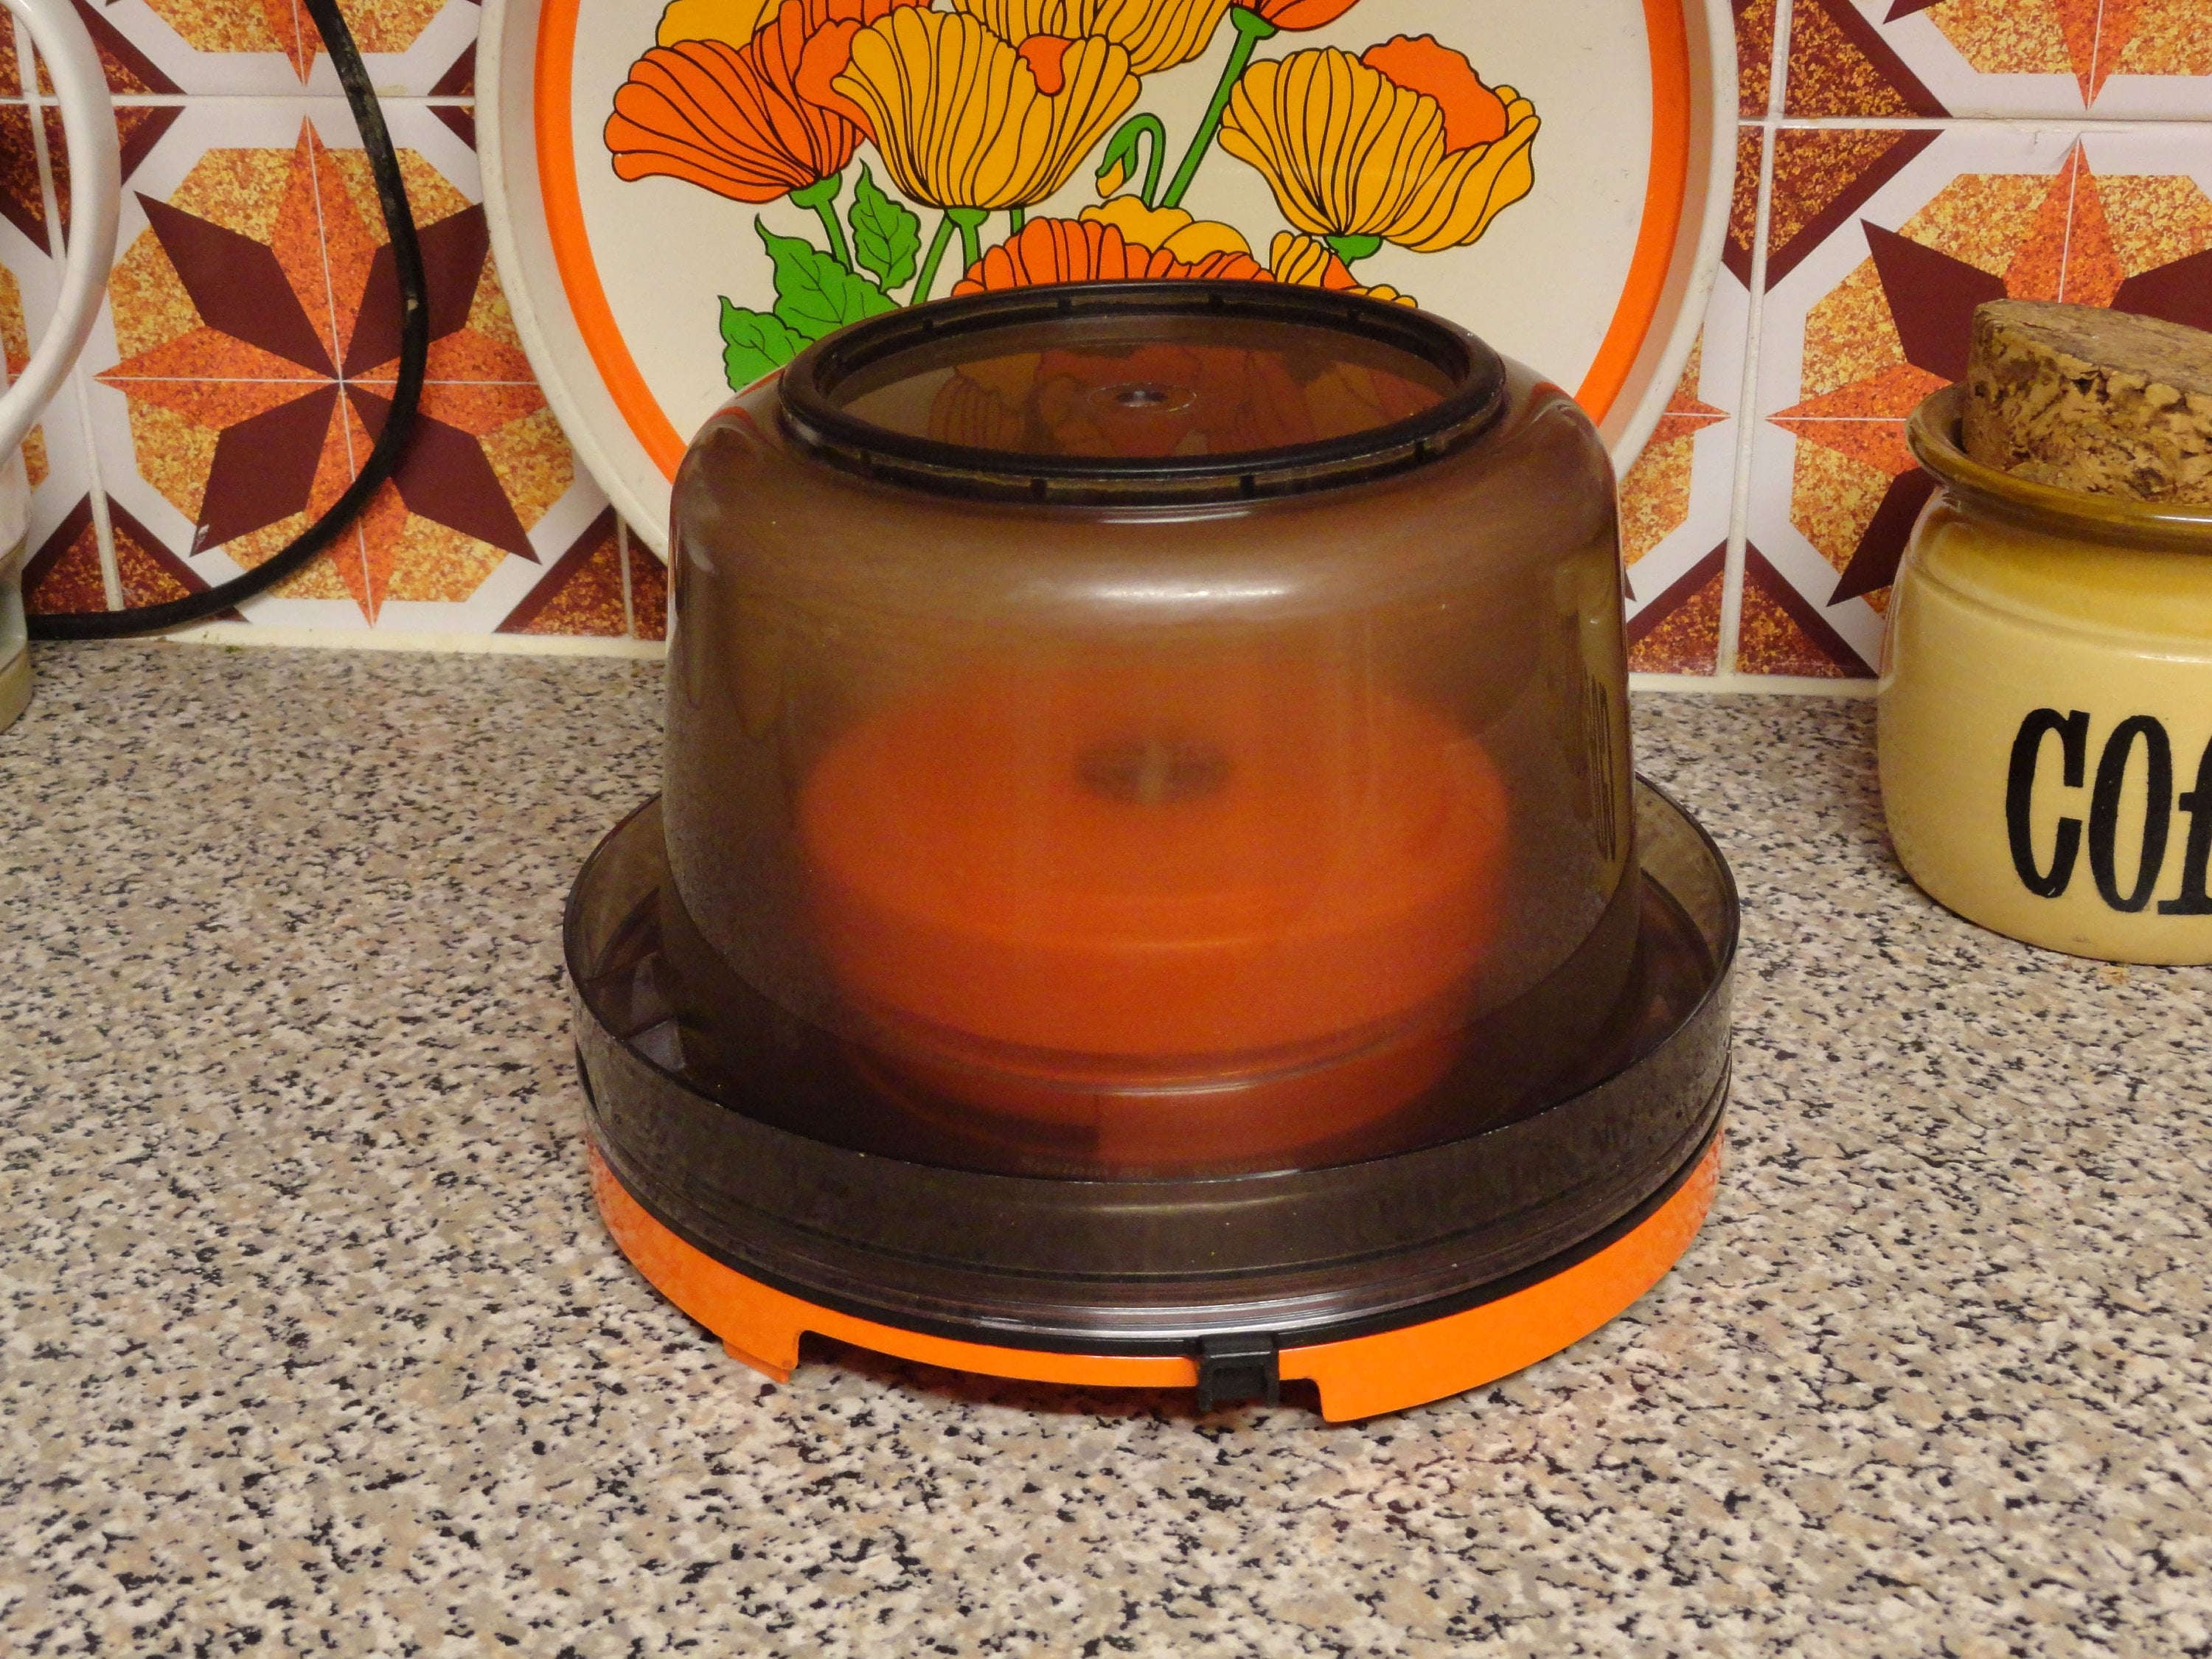 1970s Salter 'flying Saucer' Kitchen Weighing Scales. Calorie Counter Scale.  3kg or 6lb. Retro Kitchen Weighing Scale. 